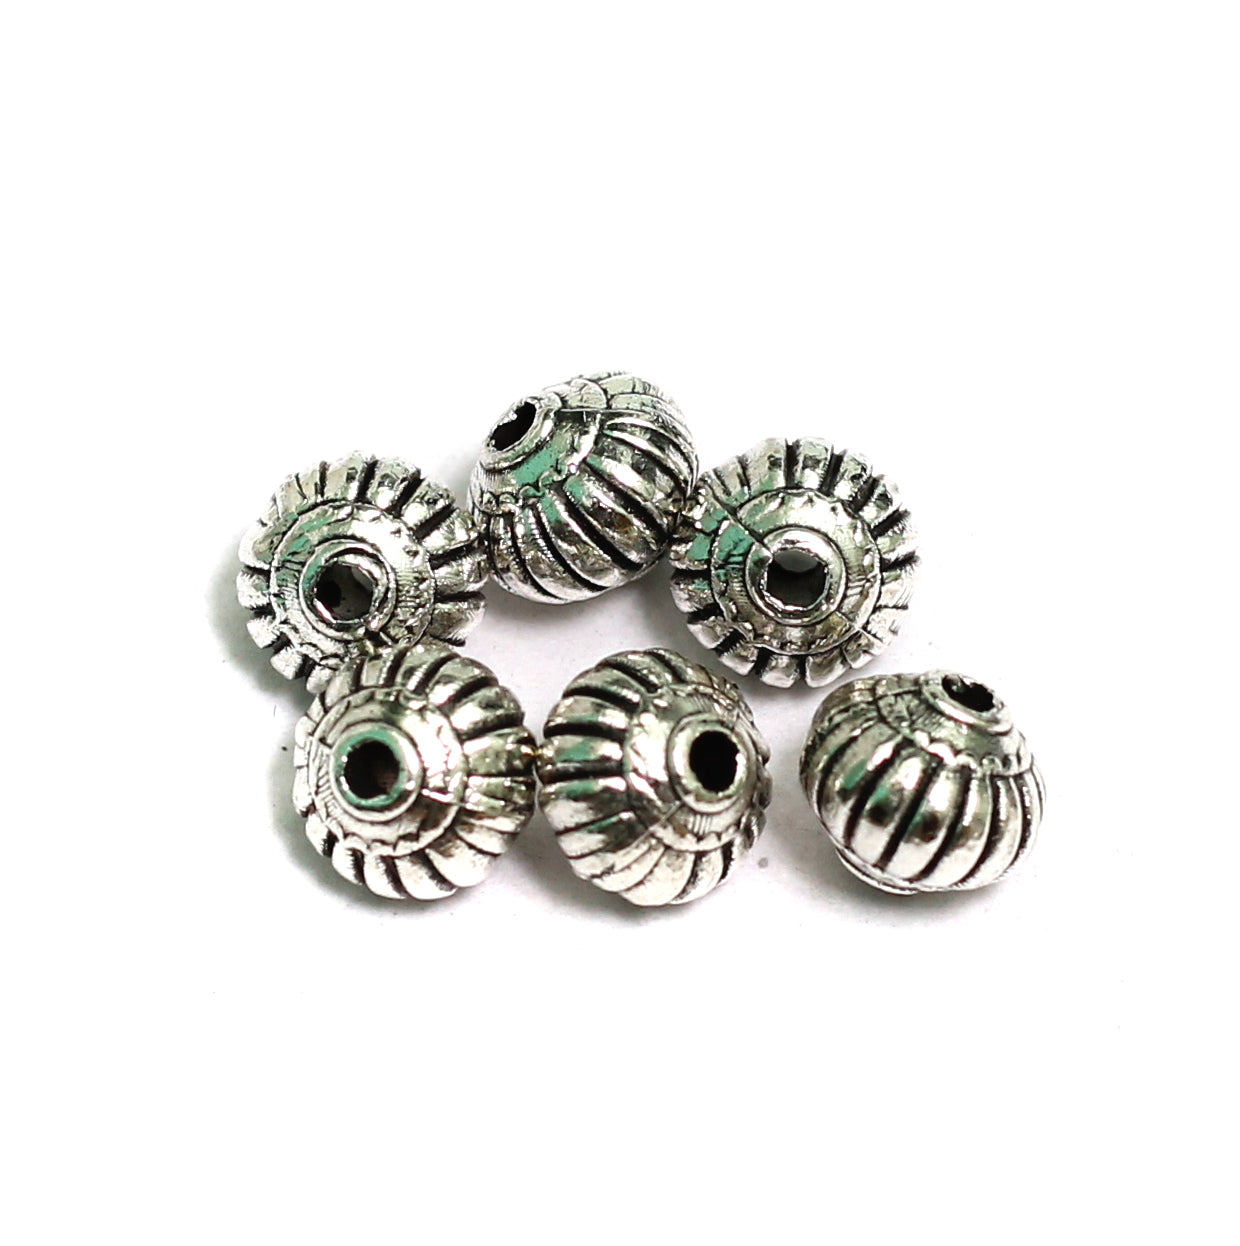 Bali Sterling Silver Beads | Bead Caps | 5.5mm Diameter | 2 pieces